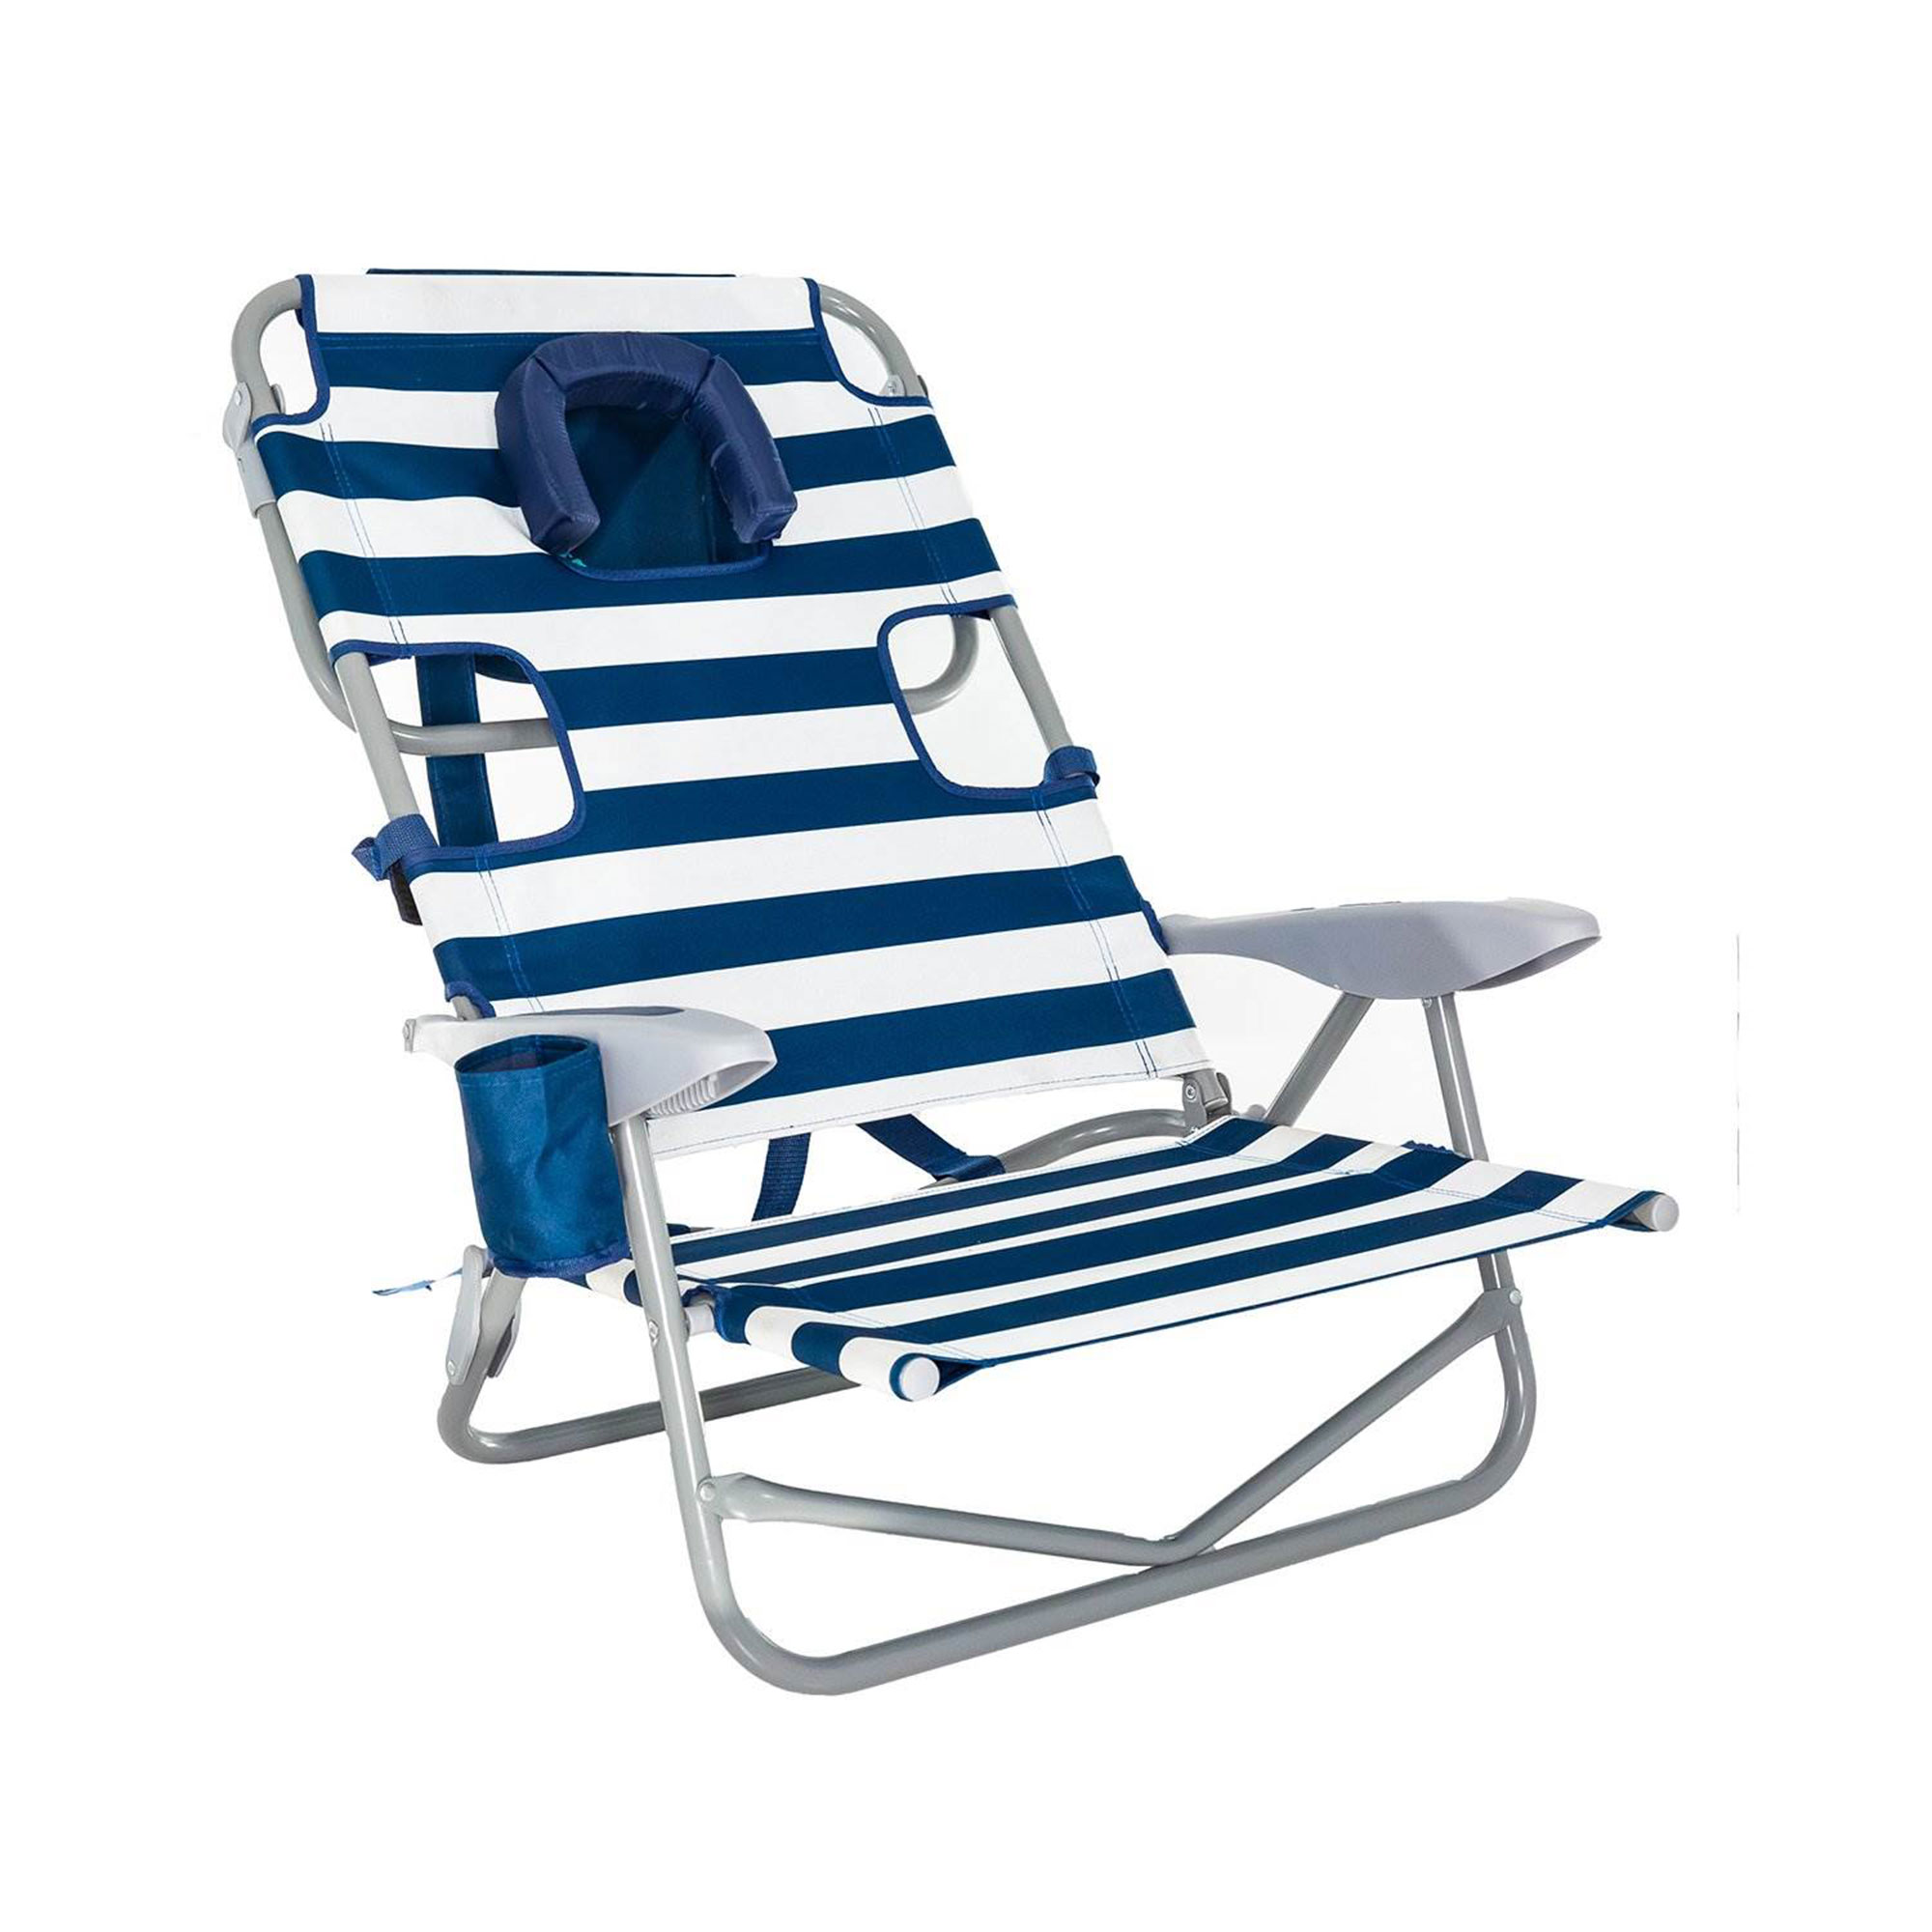 Ostrich On-Your-Back Outdoor Reclining Beach Pool Camping Chair,Blue Stripe - image 5 of 11